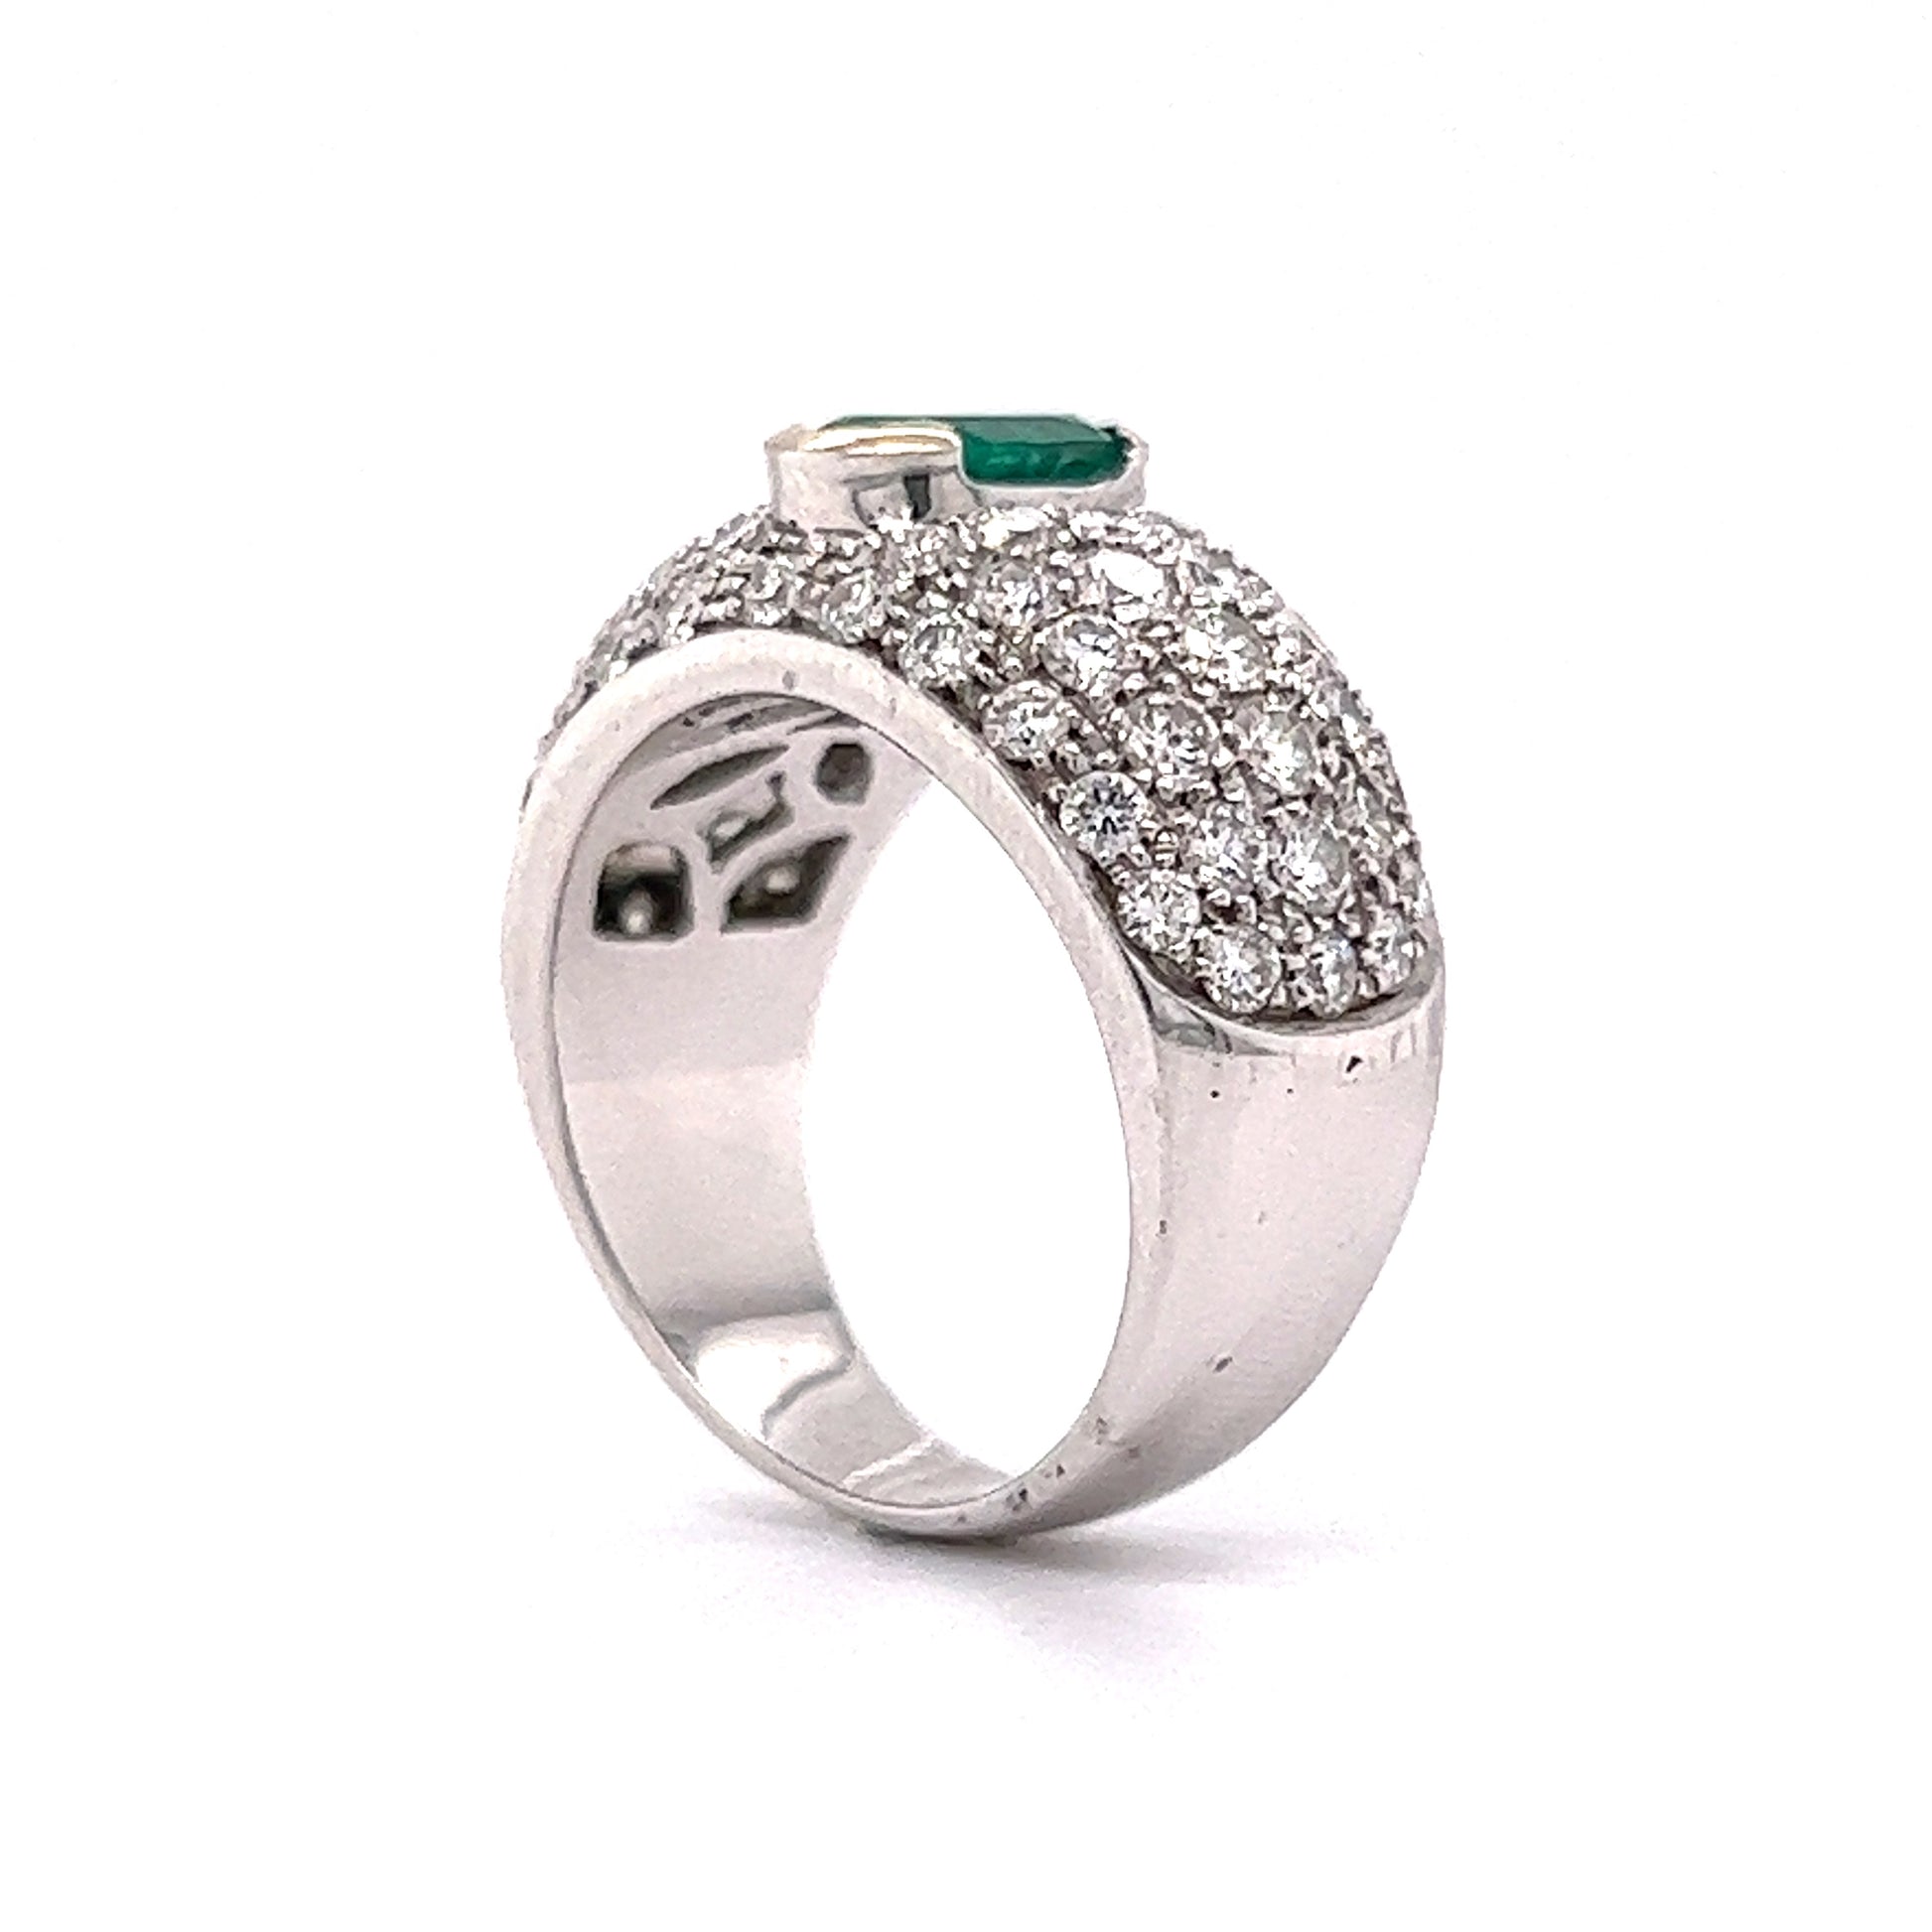 Emerald & Pave Diamond Cocktail Ring in 18k White Gold